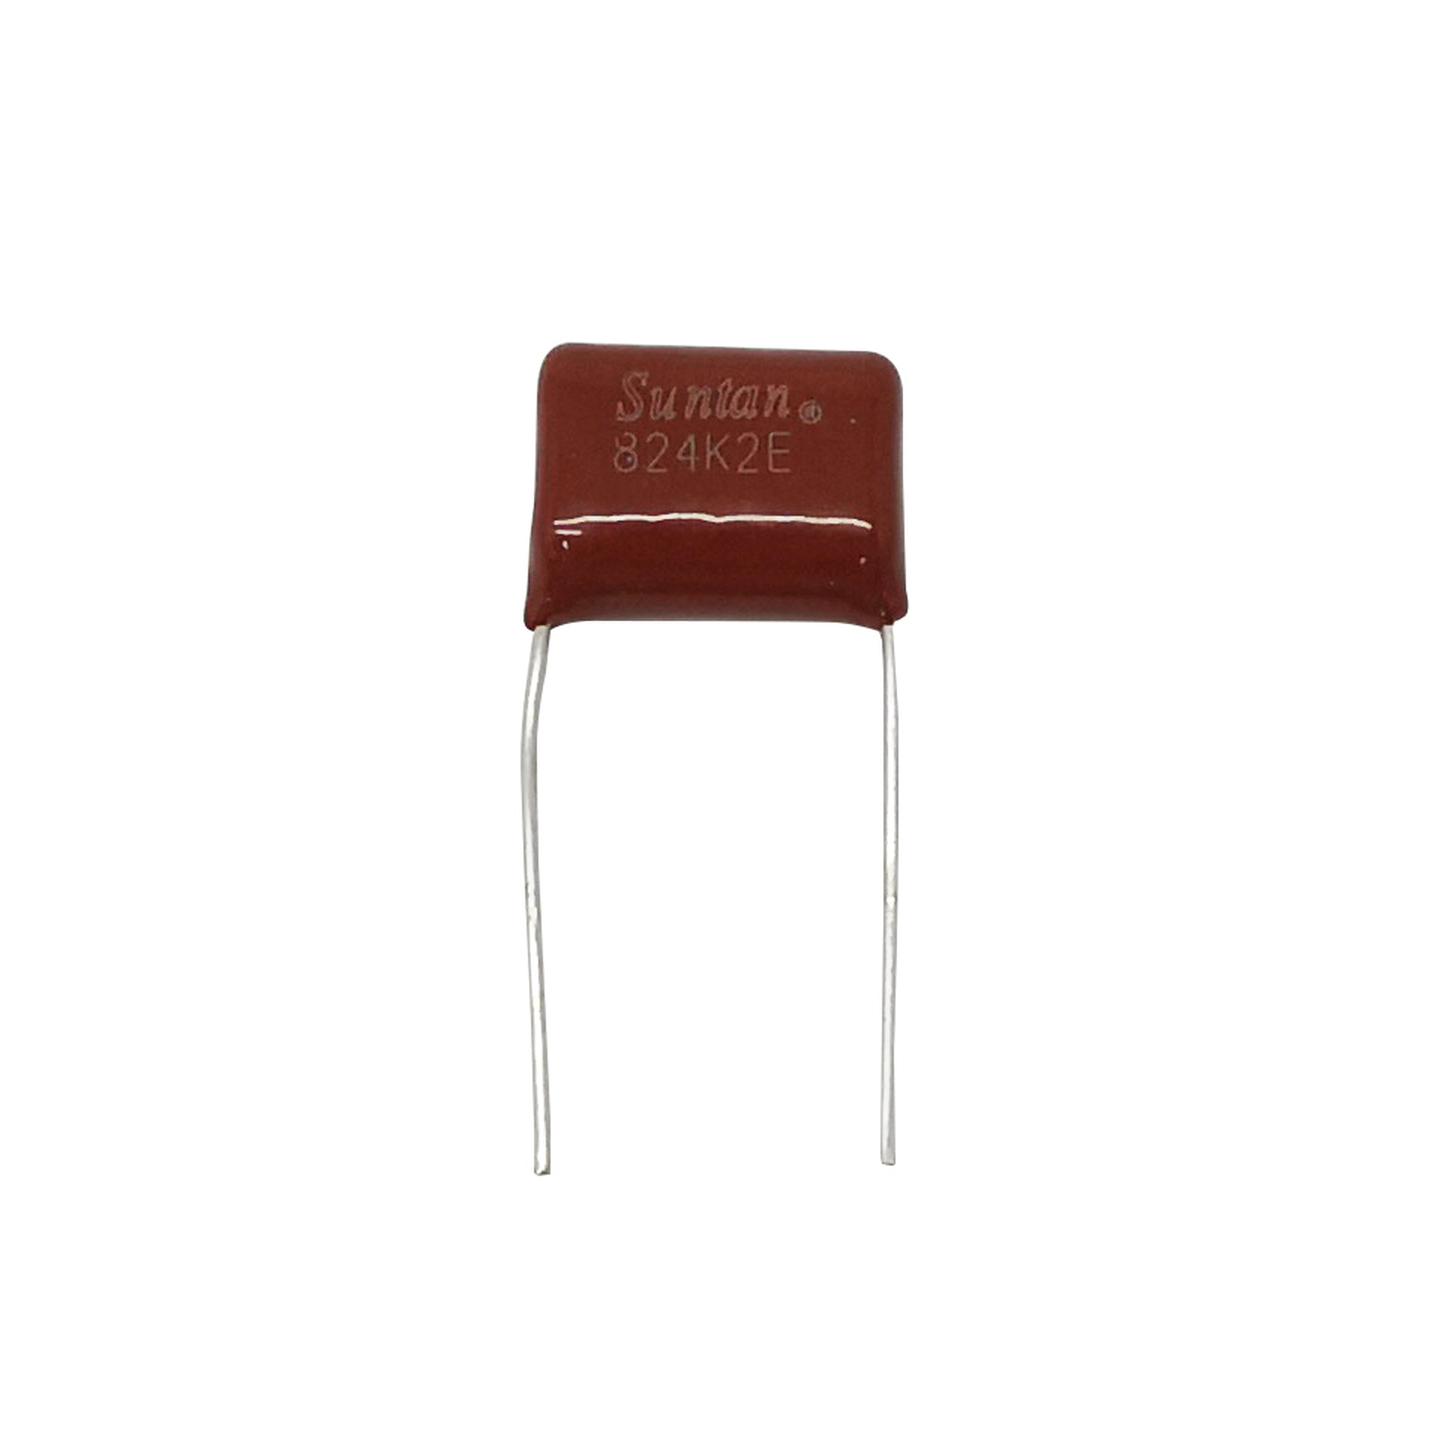 820nF 100VDC Polyester Capacitor